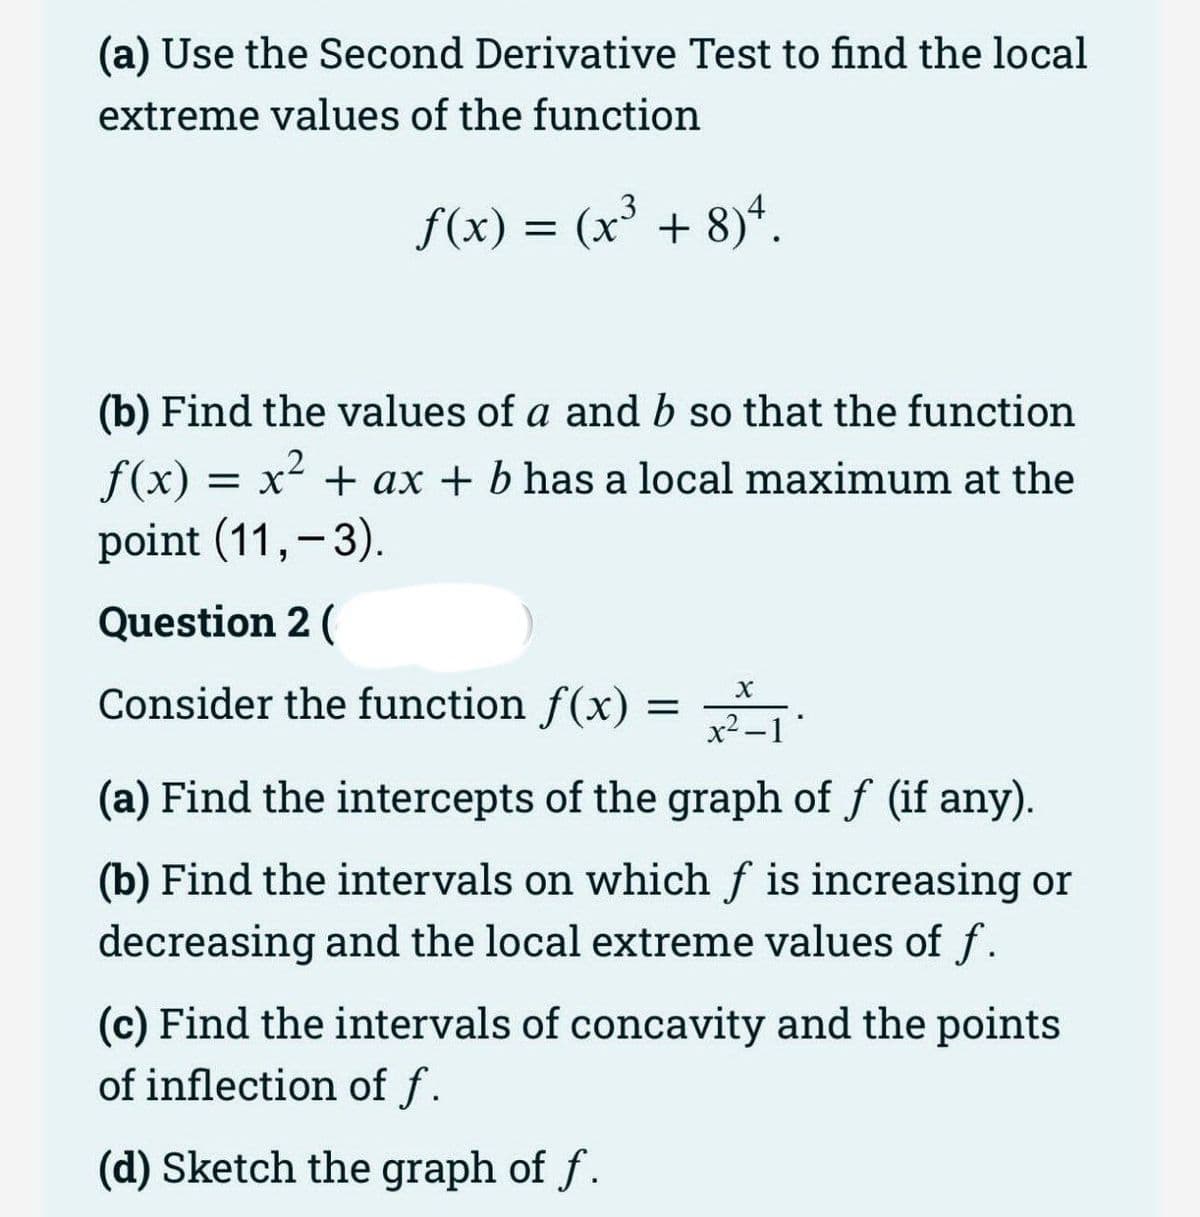 (a) Use the Second Derivative Test to find the local
extreme values of the function
f(x) = (x³ + 8)*.
(b) Find the values of a and b so that the function
f(x)
point (11,-3).
= x + ax + b has a local maximum at the
Question 2 (
Consider the function f(x)
x2 -1
(a) Find the intercepts of the graph of f (if any).
(b) Find the intervals on which f is increasing or
decreasing and the local extreme values of f.
(c) Find the intervals of concavity and the points
of inflection of f.
(d) Sketch the graph of f.
